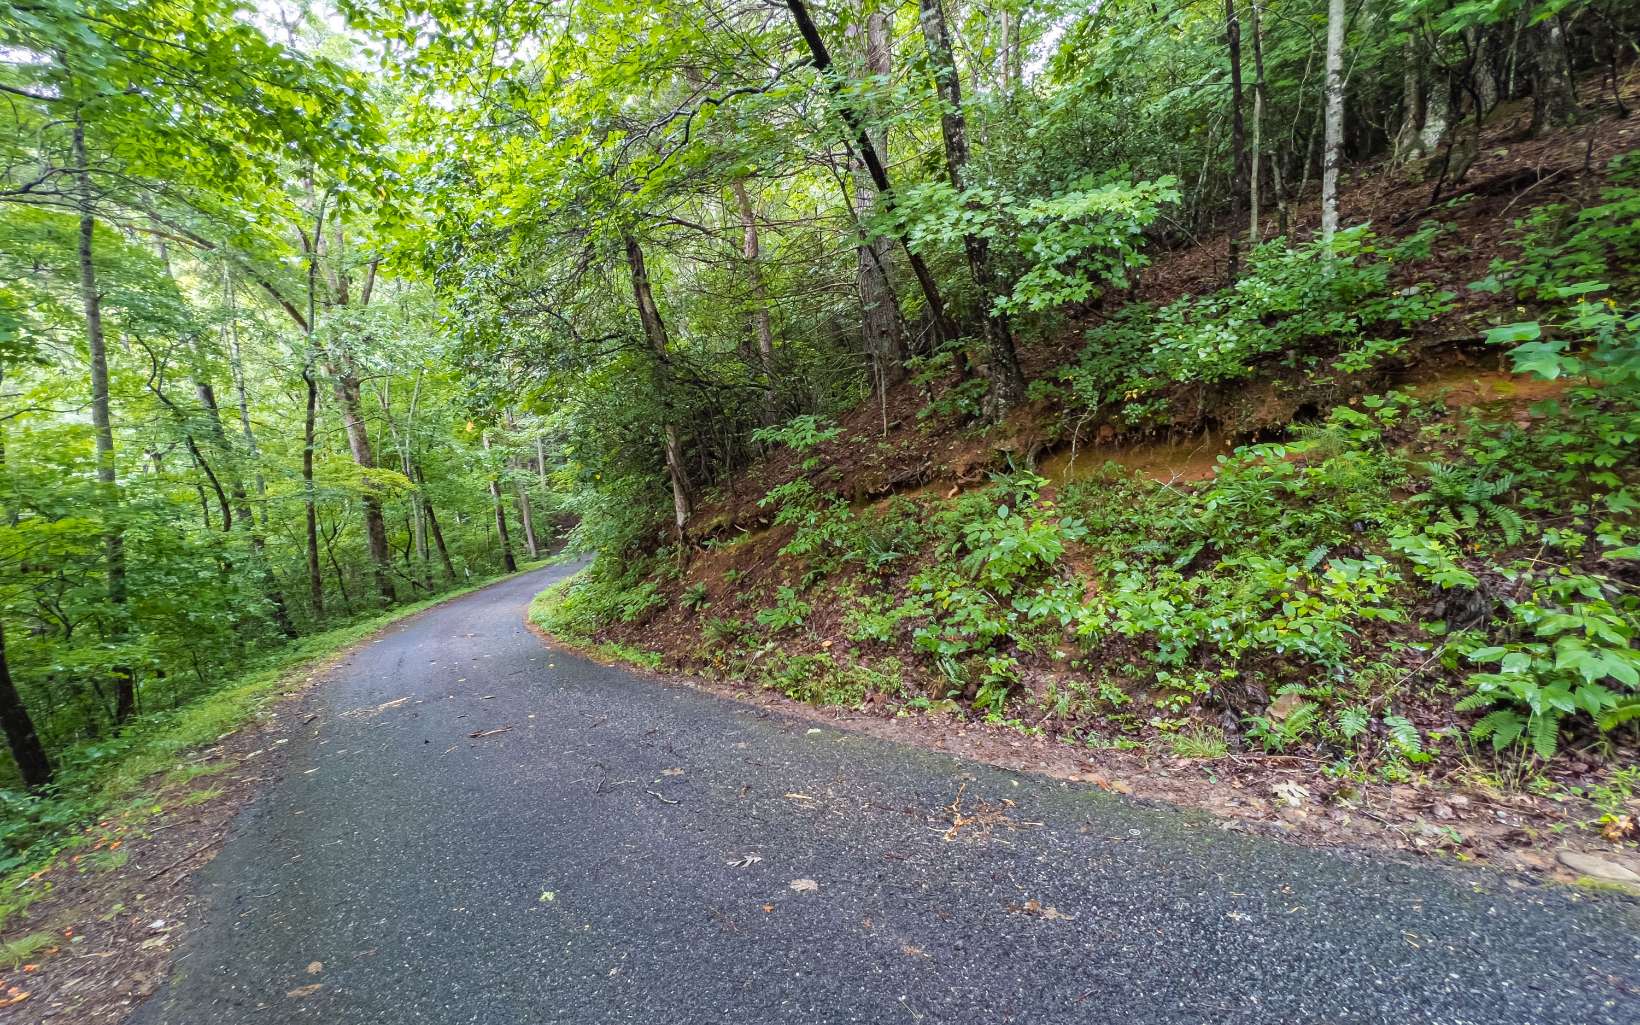 1.61 acres with underground utilities, water, phone, electric and all-paved access from the incredibly scenic White Oak Forest Road. This wooded lot is less than 5 miles from downtown Hiawassee, Lake Chatuge access and Towns County schools. The attraction-packed Helen, GA is less than 20 miles away, and in between are waterfalls, hiking trails (Appalachian Trail access), and camping and fishing areas! If you're looking for a safe and very neighborly place to build your mountain getaway or full-time residence, then this lot is for you.